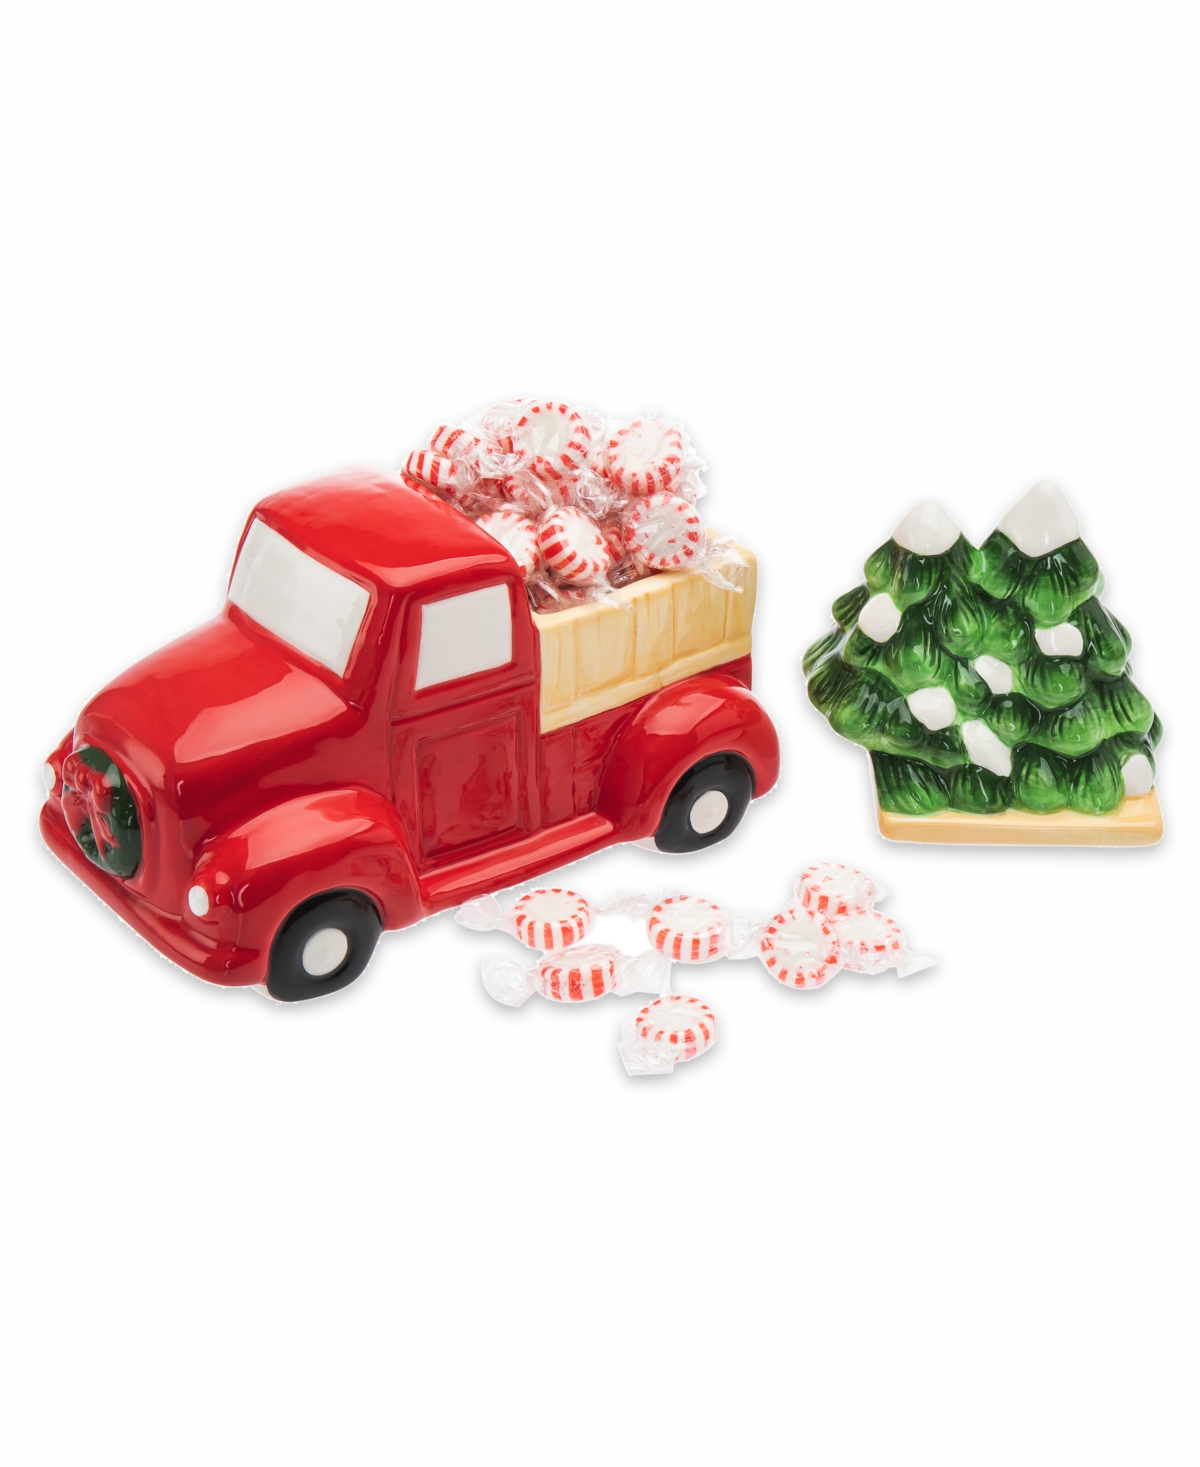 Godinger Truck Candy Dish With Removable Tree Display Set, 2 Piece In Red